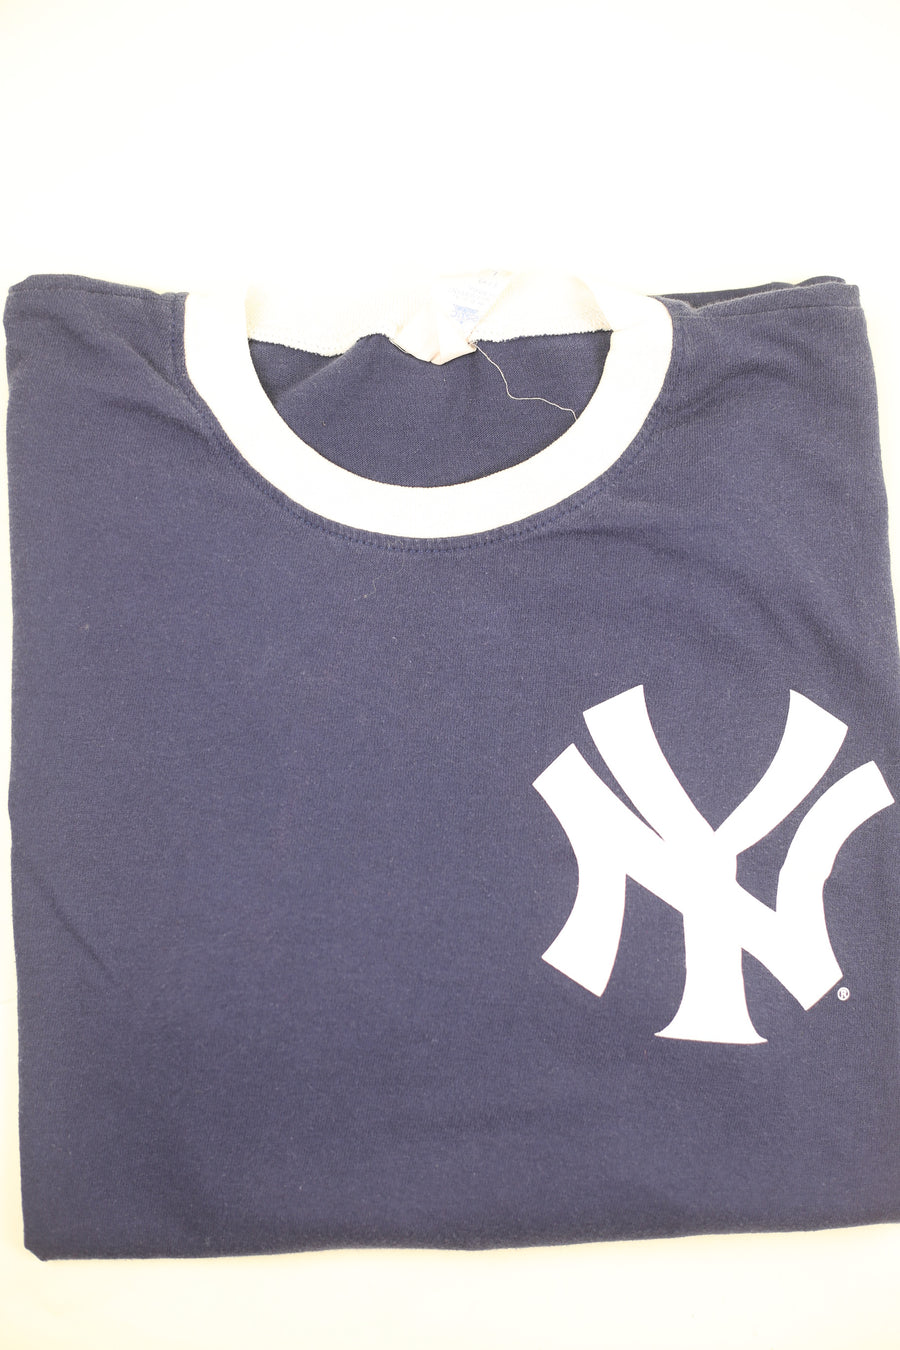 T-shirt YANKEES made in usa 80s  -L-